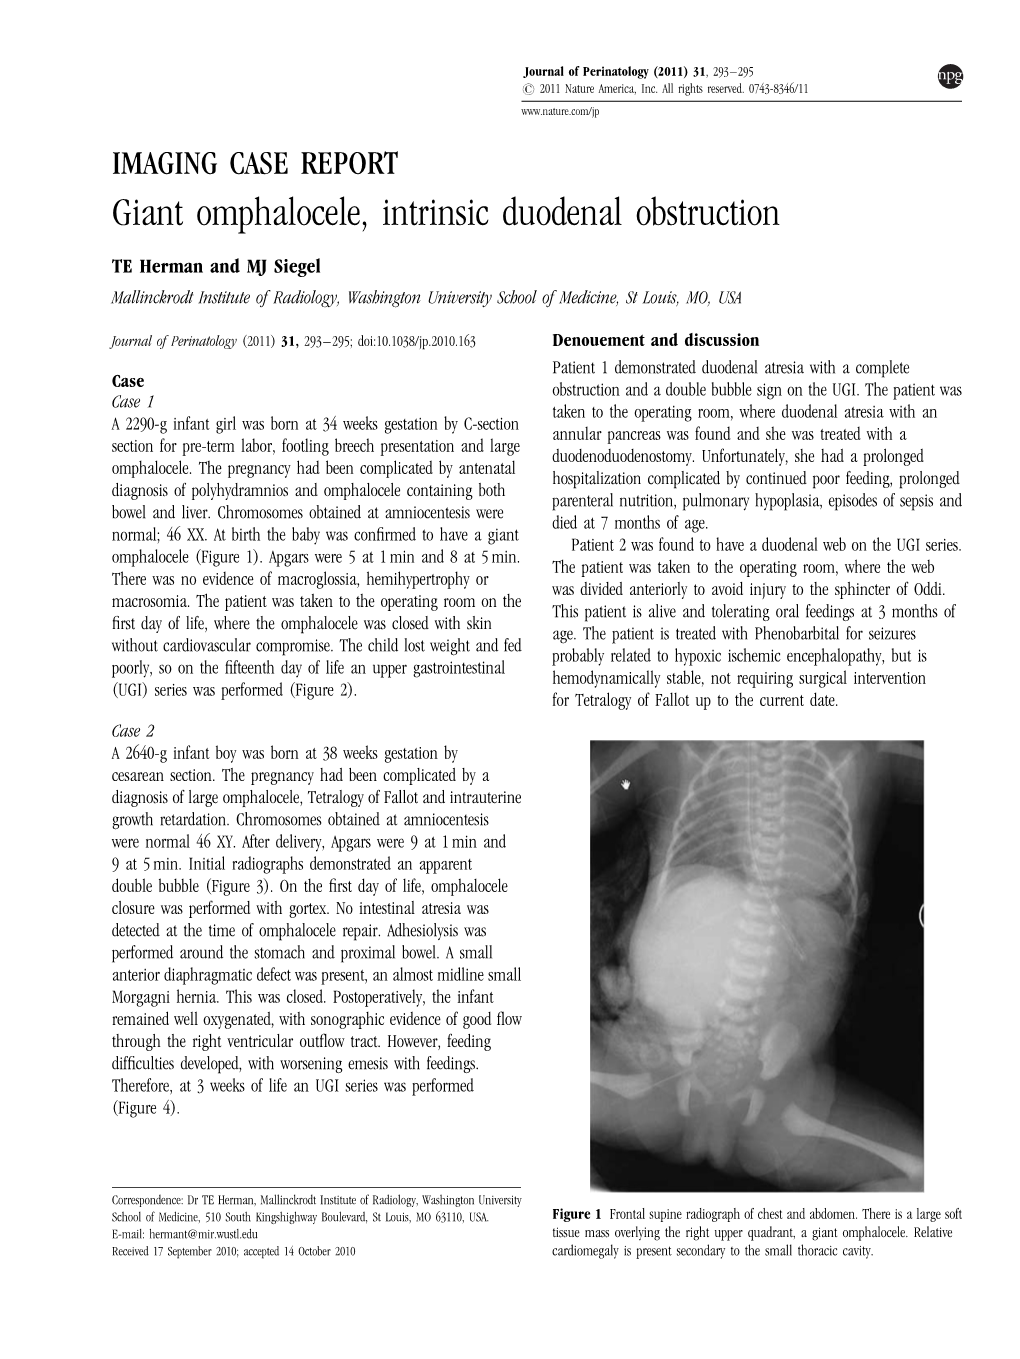 Giant Omphalocele, Intrinsic Duodenal Obstruction